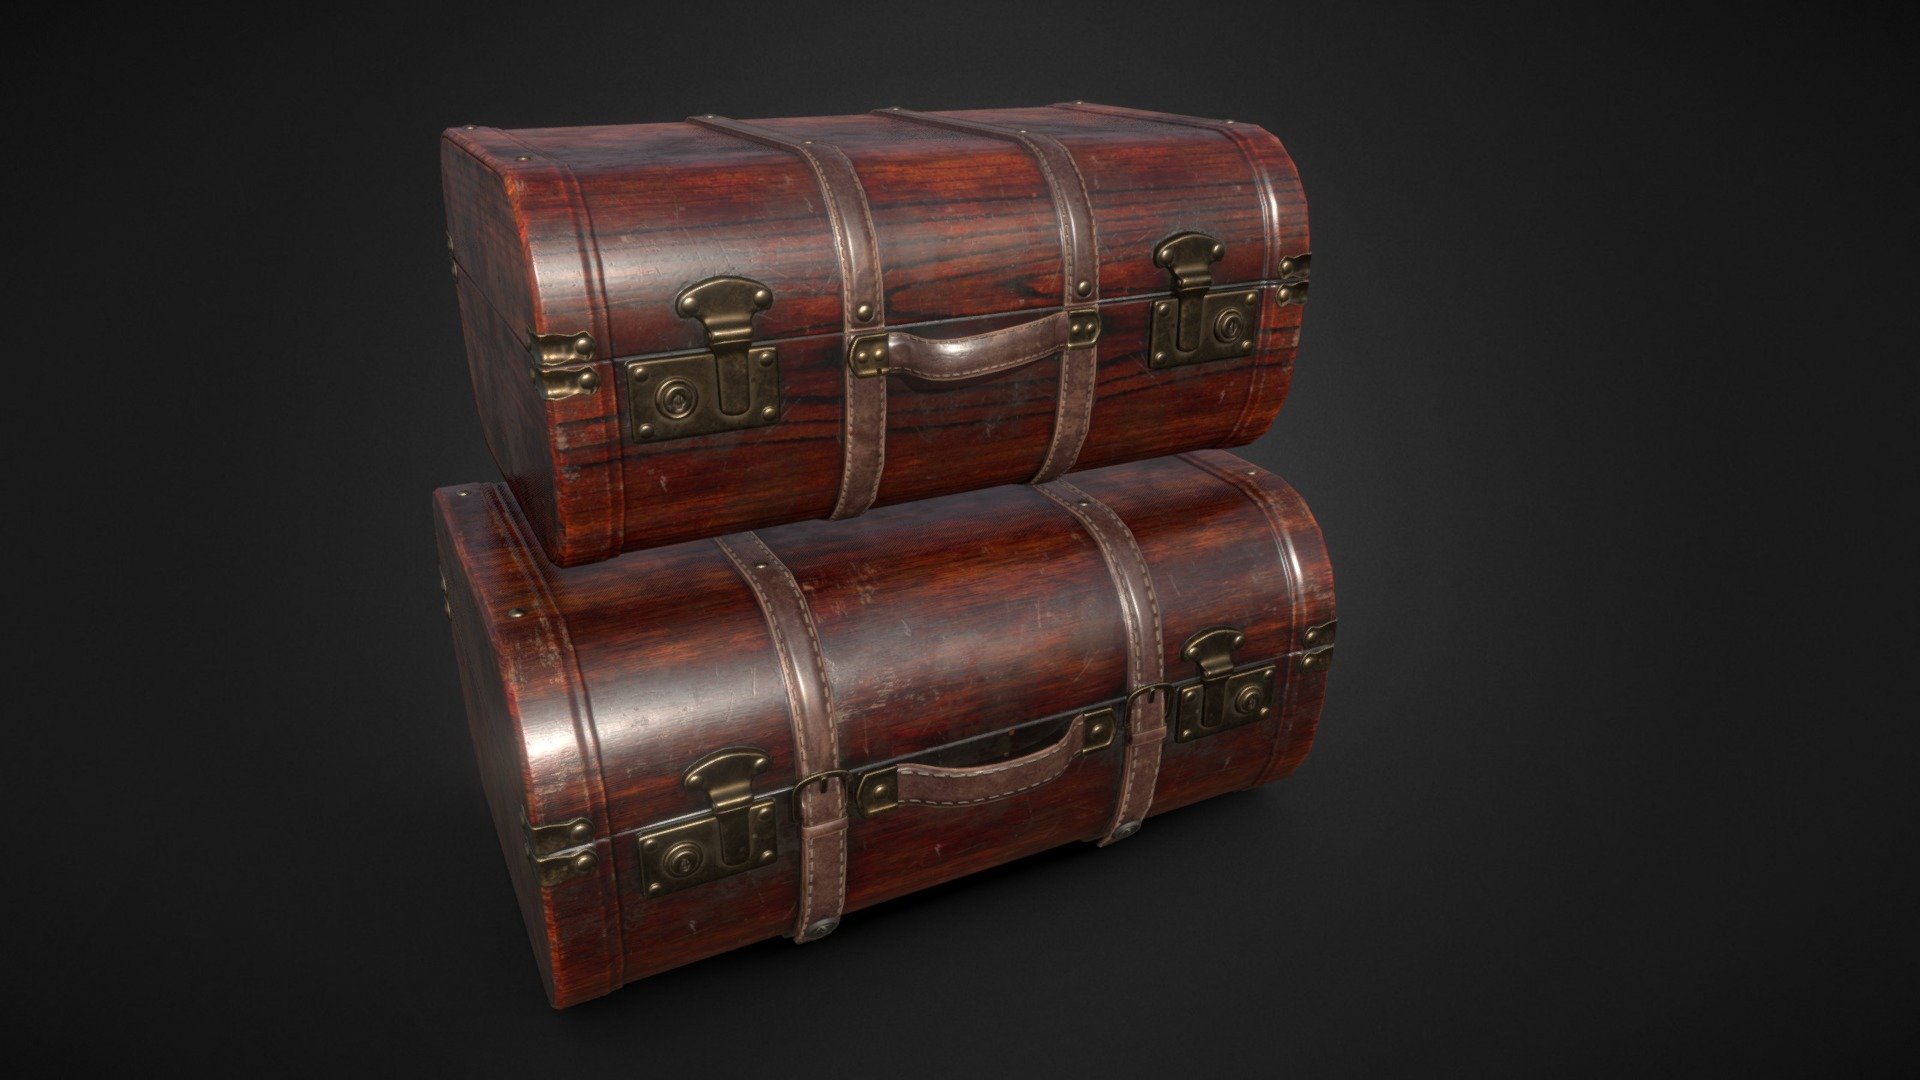 Vintage wooden chests stylized to suitcases.

Low poly game ready model. Total polycount 12390 tris. (5854 and 6536)

2 Items.

PBR Metallic - Roughness (2k for wood and 512 for metal) textures.

Model created on Blender. Textured with Substance Painter 3d model